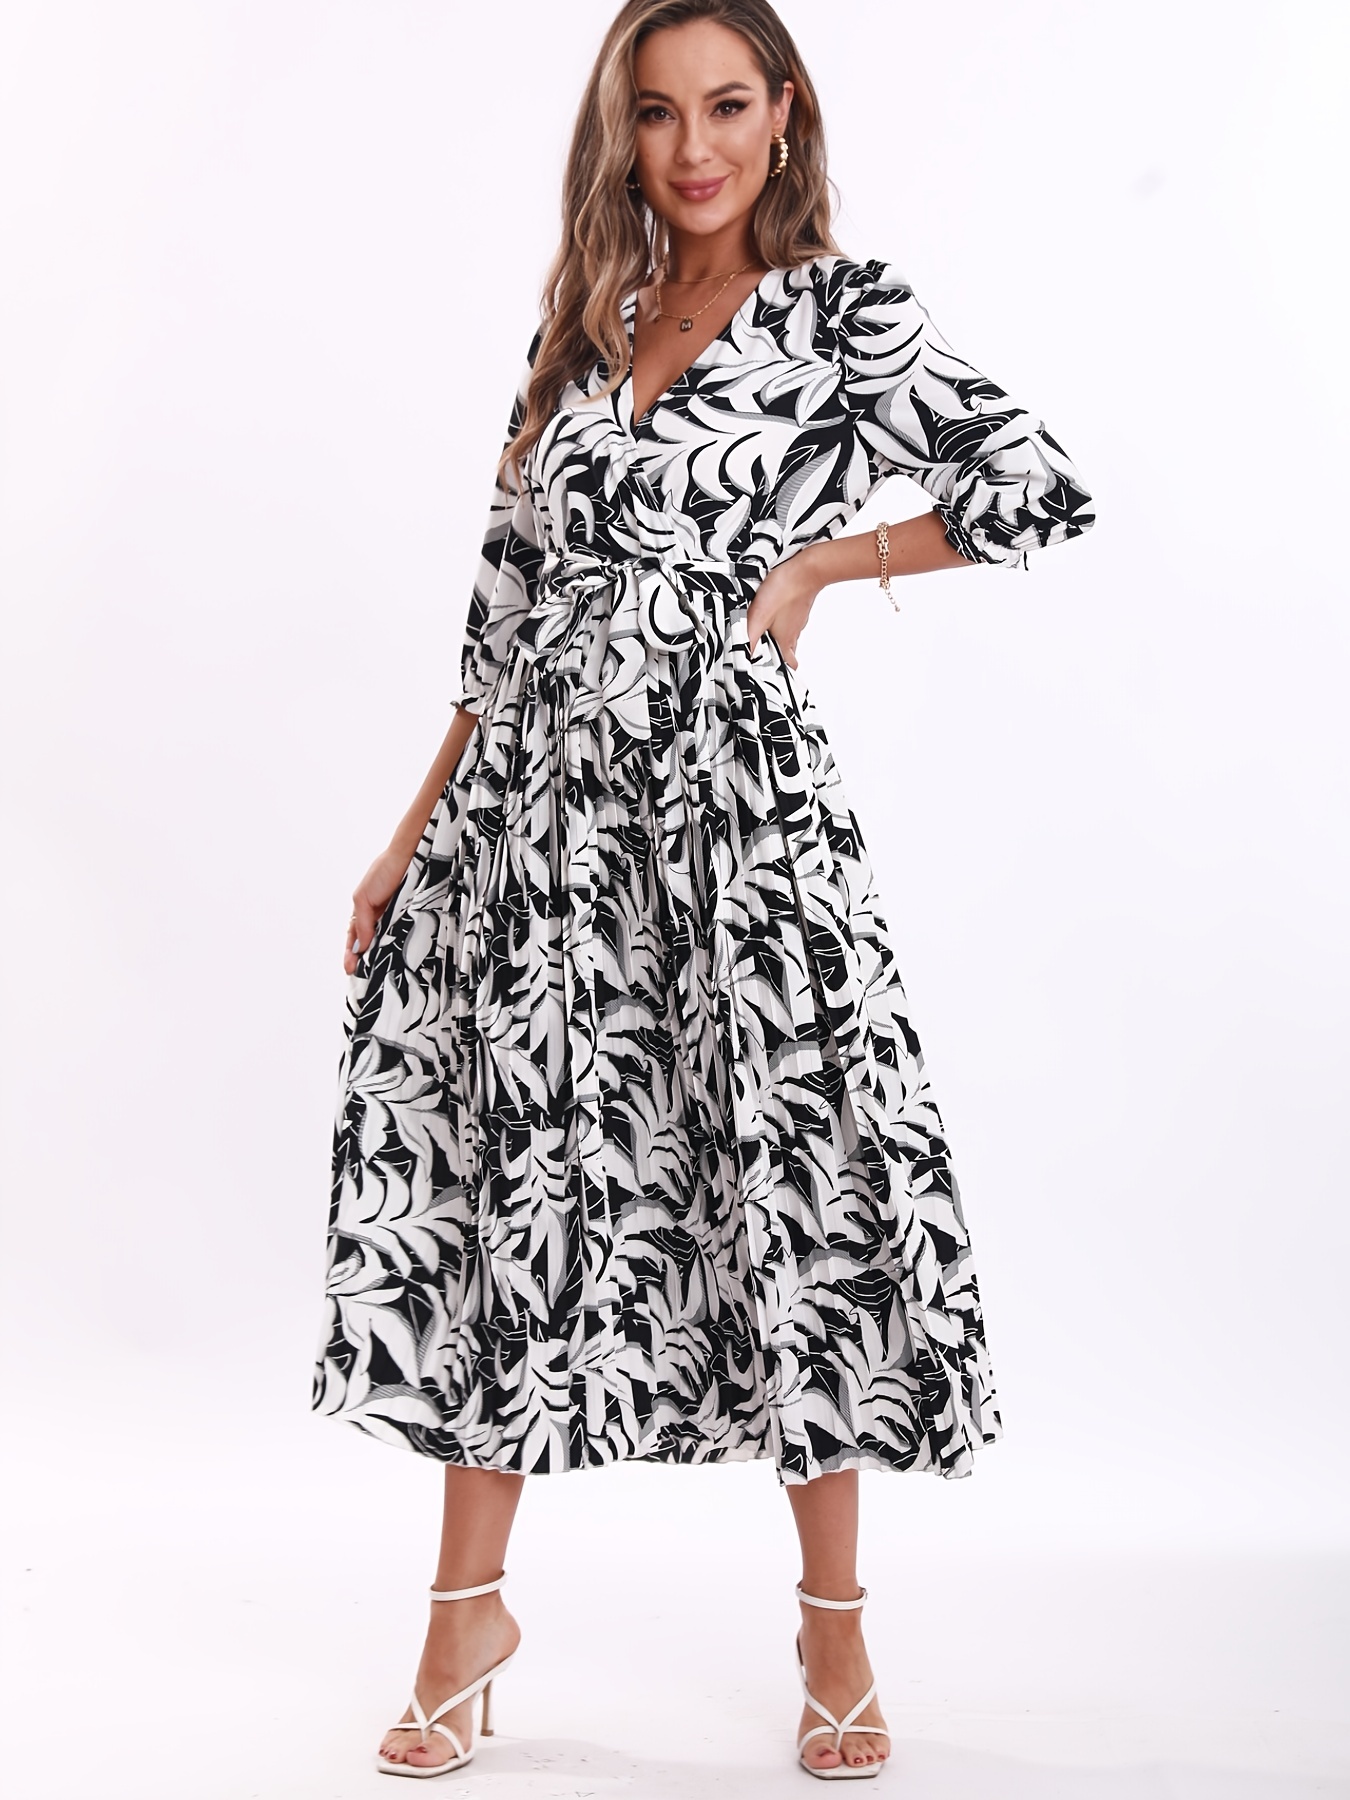 elegant floral print dress v neck 3 4 sleeve dress casual every day dress womens clothing